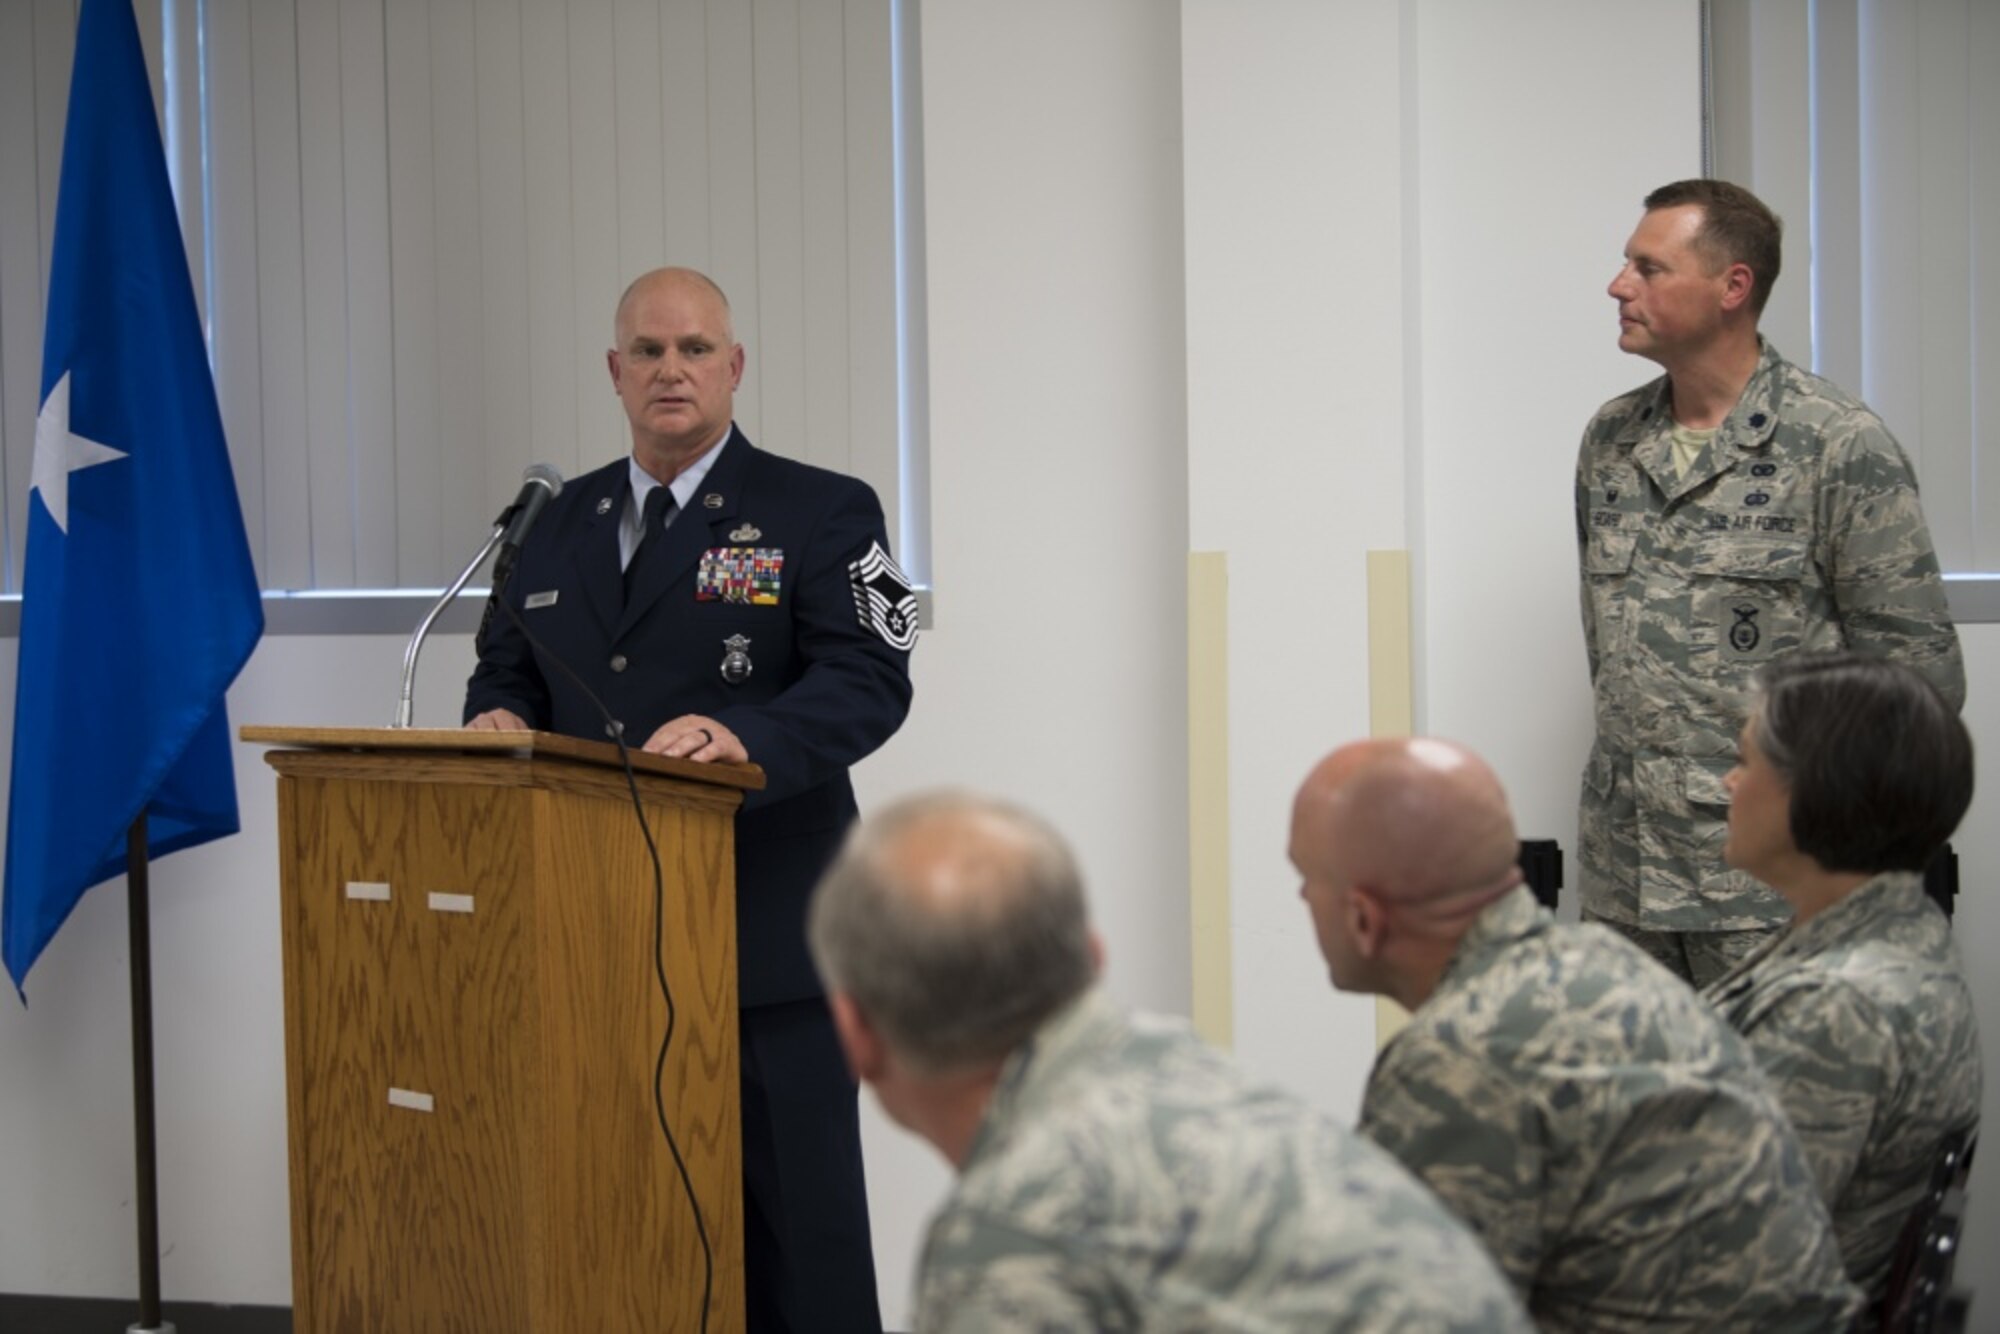 Chief Master Sgt. P. Wayne Hughes speaks to the crowd of Security Forces personnel at his promotion ceremony held June 3, 2017 at McLaughlin Air National Guard Base, Charleston, W.Va. Hughes is a 27-year veteran of Security Forces who will assume the role of chief enlisted manager with this promotion. (U.S. Air National Guard photo by Capt. Holli Nelson)